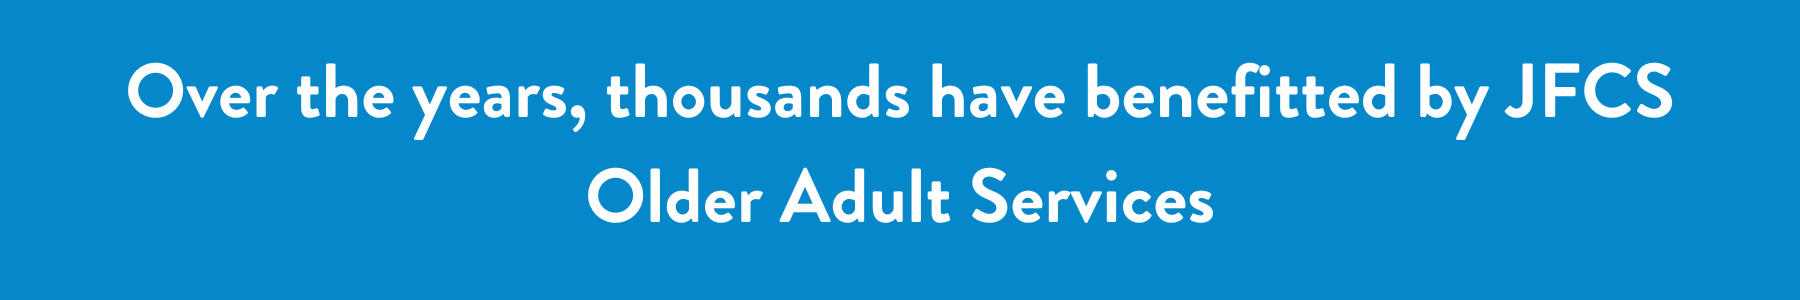 Over the years, thousands have benefitted by JFCS Older Adult Services.